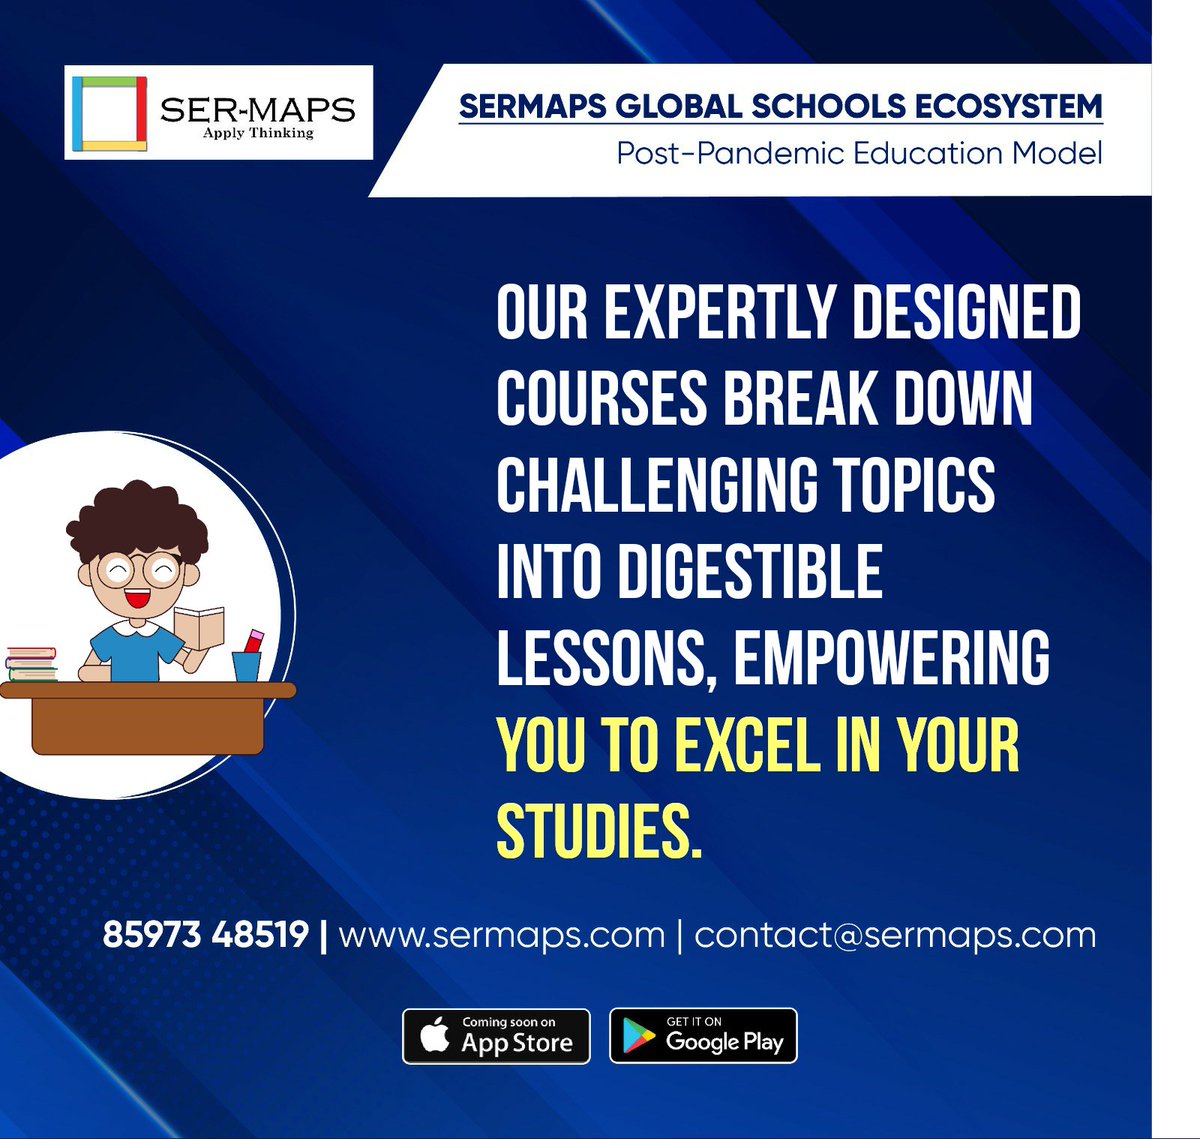 Our expertly designed courses break down challenging topics into digestible lessons, empowering you to excel in your studies.🤩

Website - Sermaps.com

#globalschoolsecosystem
#sermaps #edtech #edtecheducation #cbse #icse #sermapseducationsystem #educationforkids